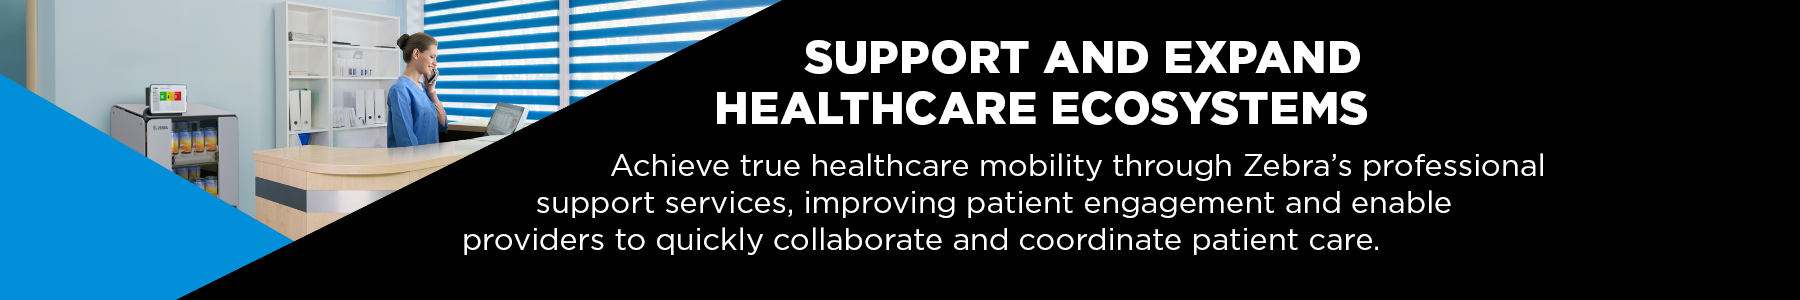 banner-5---support-and-expand-healthcare-ecosystems-1800x300